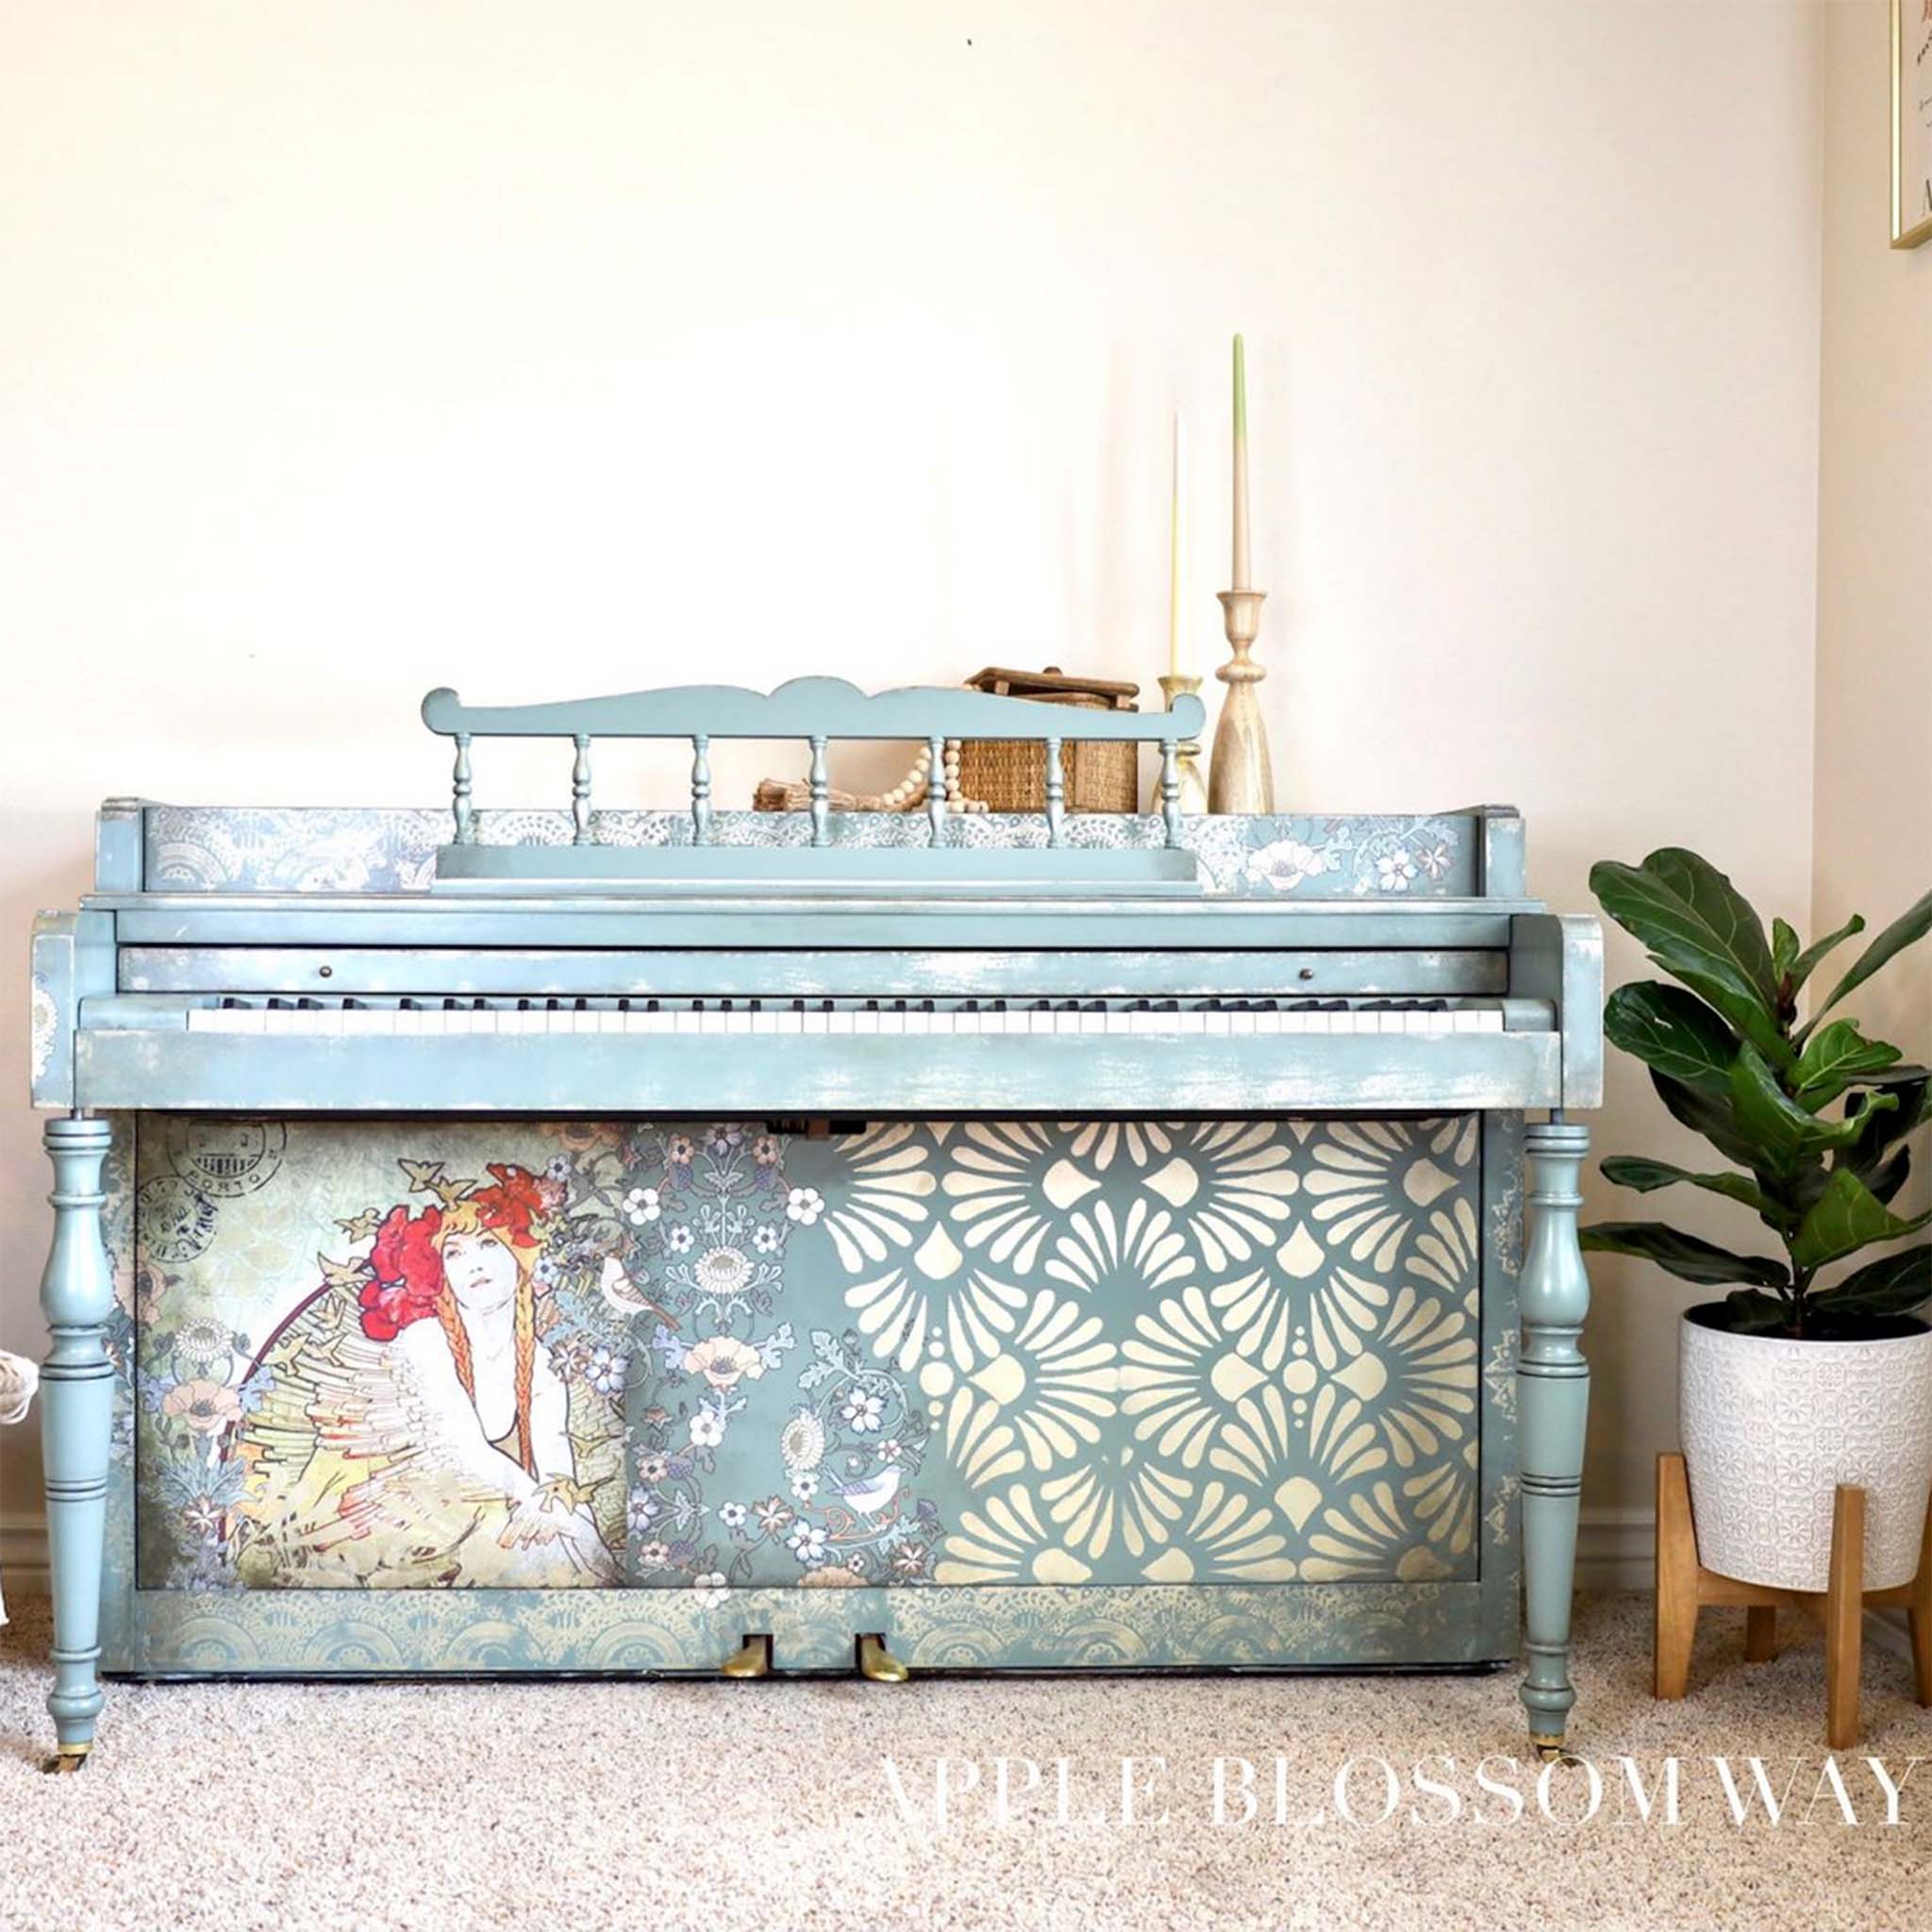 A vintage piano refurbished by Apple Blossom Way is painted pale blue and features ReDesign with Prima's Modern Deco stencil on the right half of the bottom front panel.